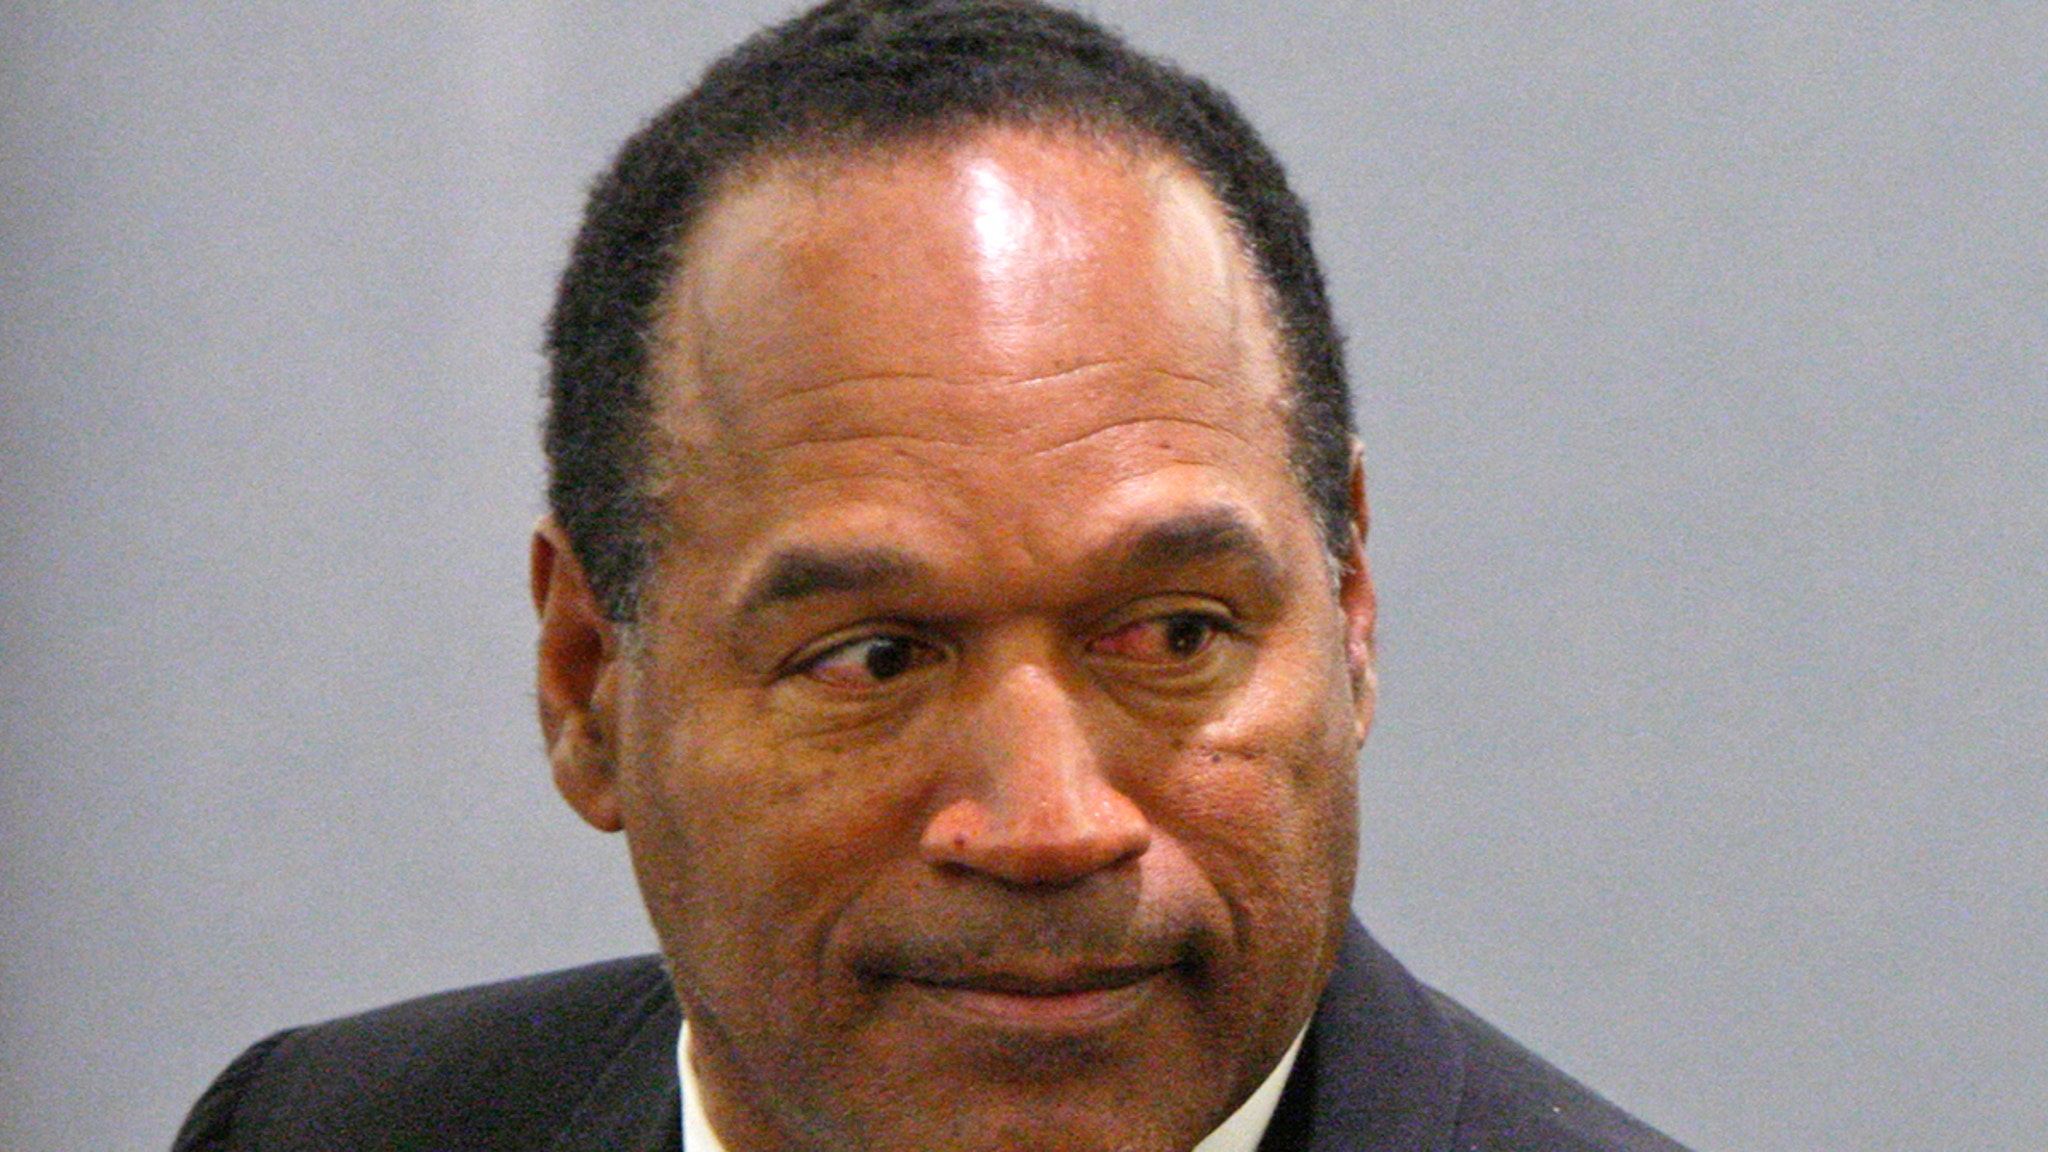 O.J. Simpson Officially Cremated, Attorney & Others Present as Witnesses